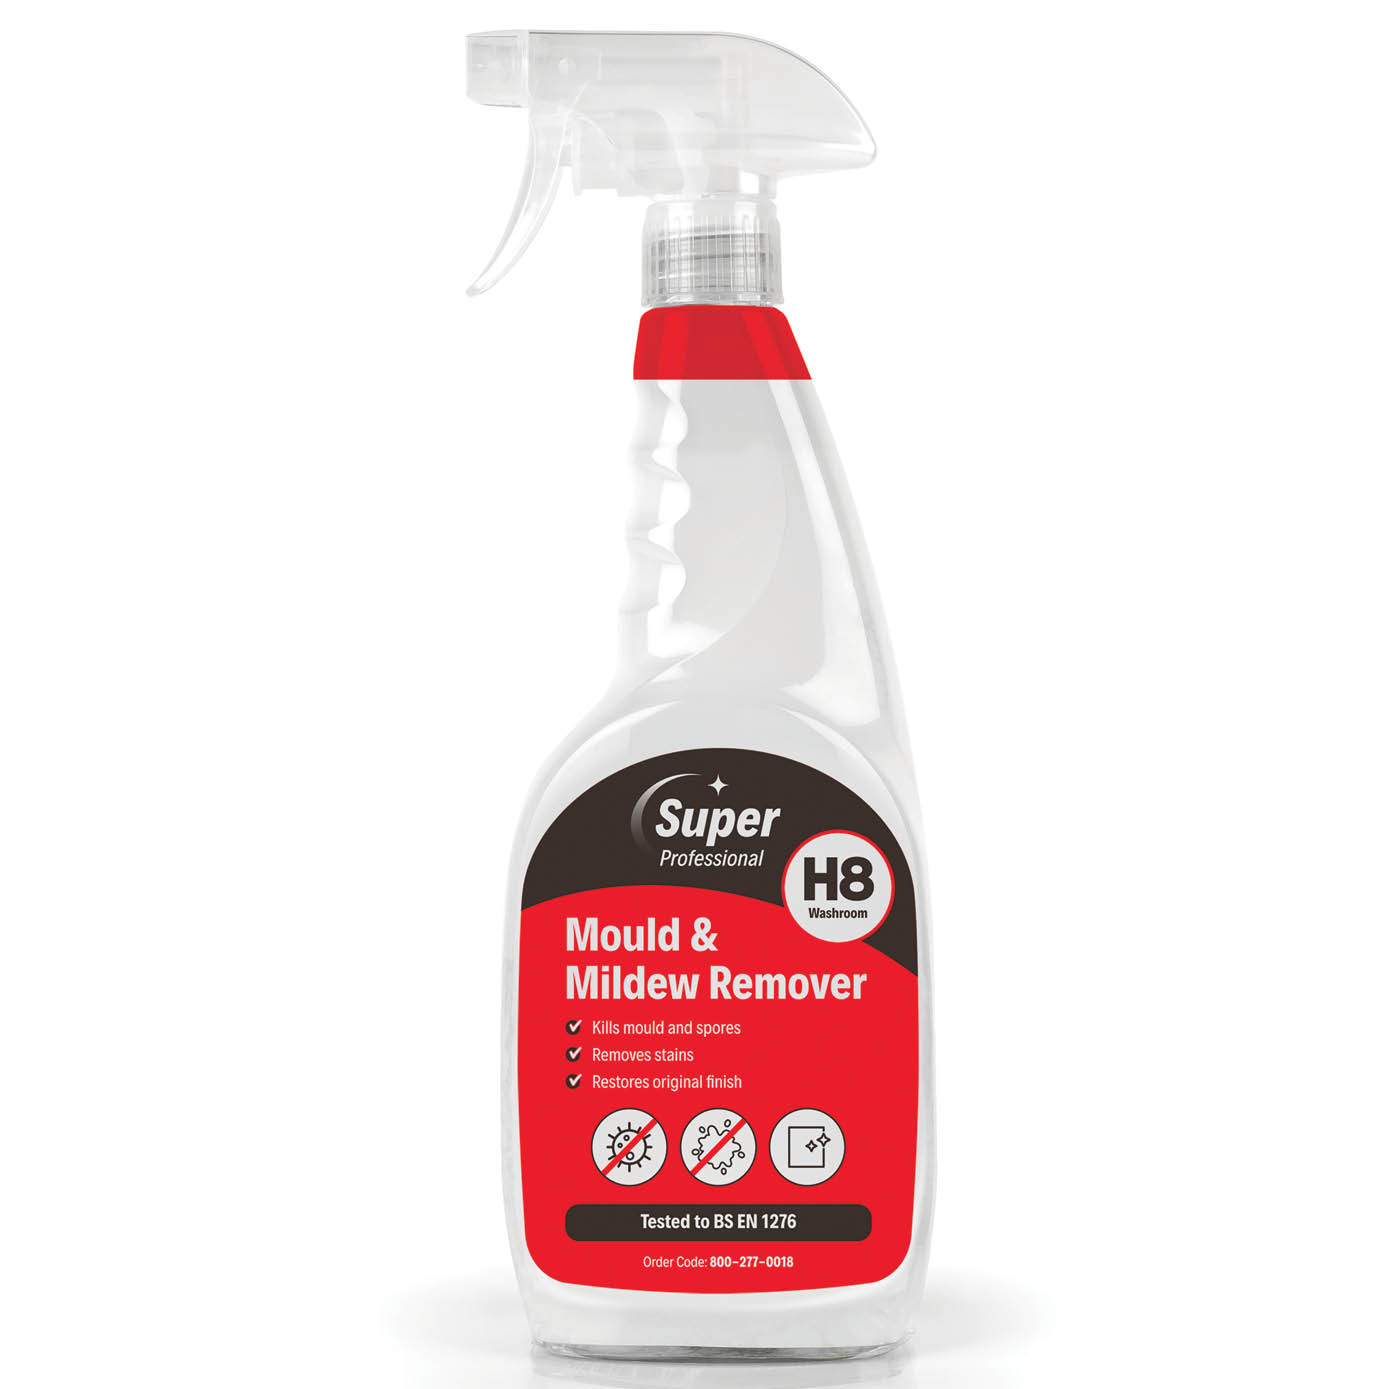 750ml JaniClean® Mould & Mildew Remover - H8